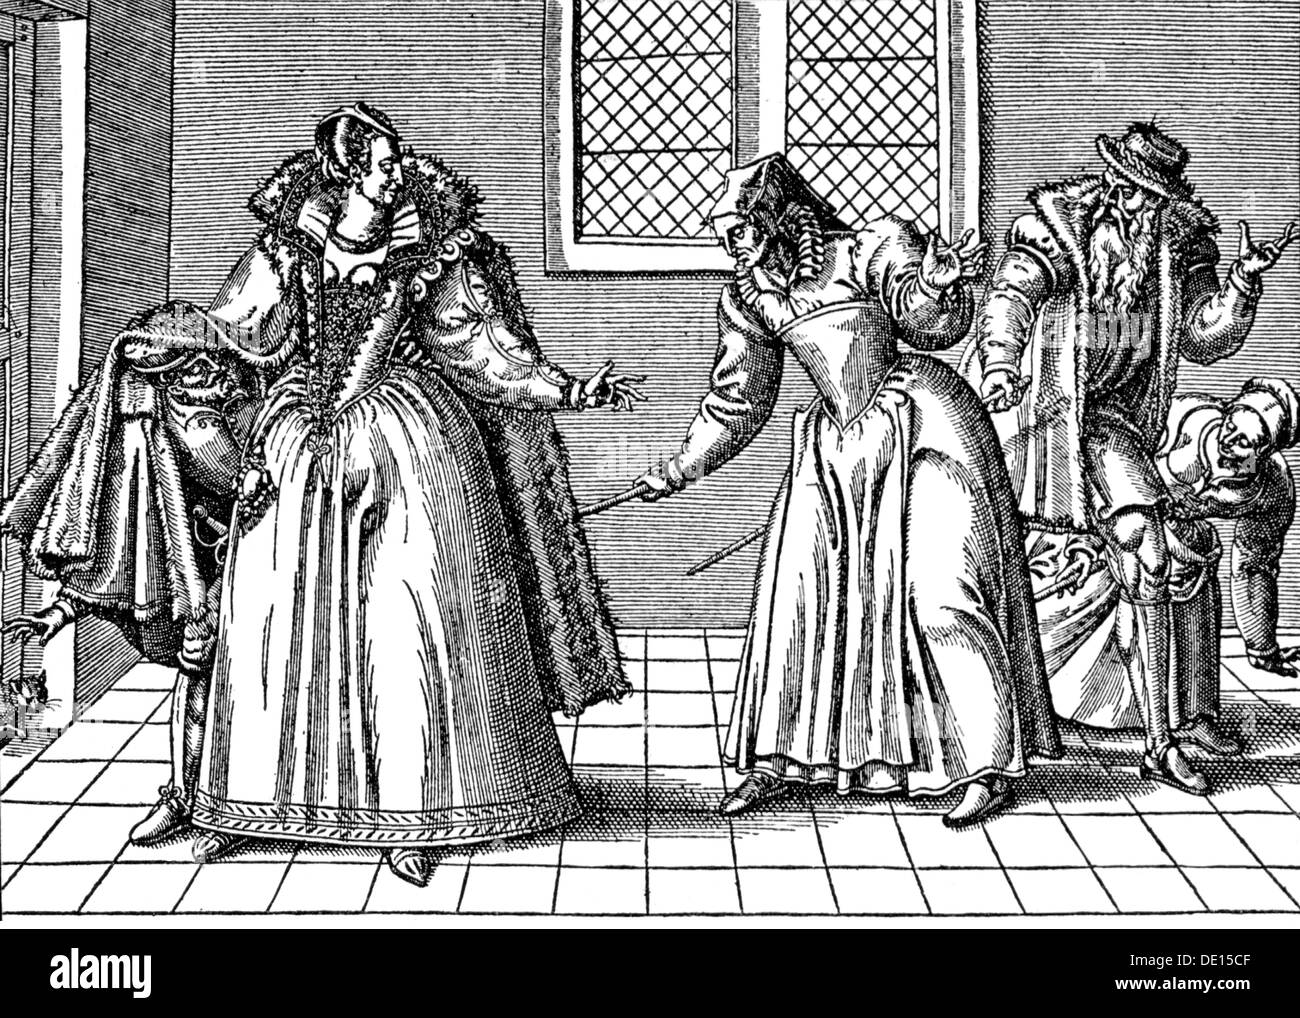 fashion, 16th century, puff skirt, copper engraving, France, 16th century, 16th century, graphic, graphics, caricature, caricatures, humor, humour, satire, clothes, outfit, outfits, ladies' fashion, fashion for women, women's clothing, dress, dresses, skirt, skirts, filler, hip, hips, full length, standing, look at, looking at, watching, watch, historic, historical, woman, women, female, man, men, male, people, Artist's Copyright has not to be cleared Stock Photo